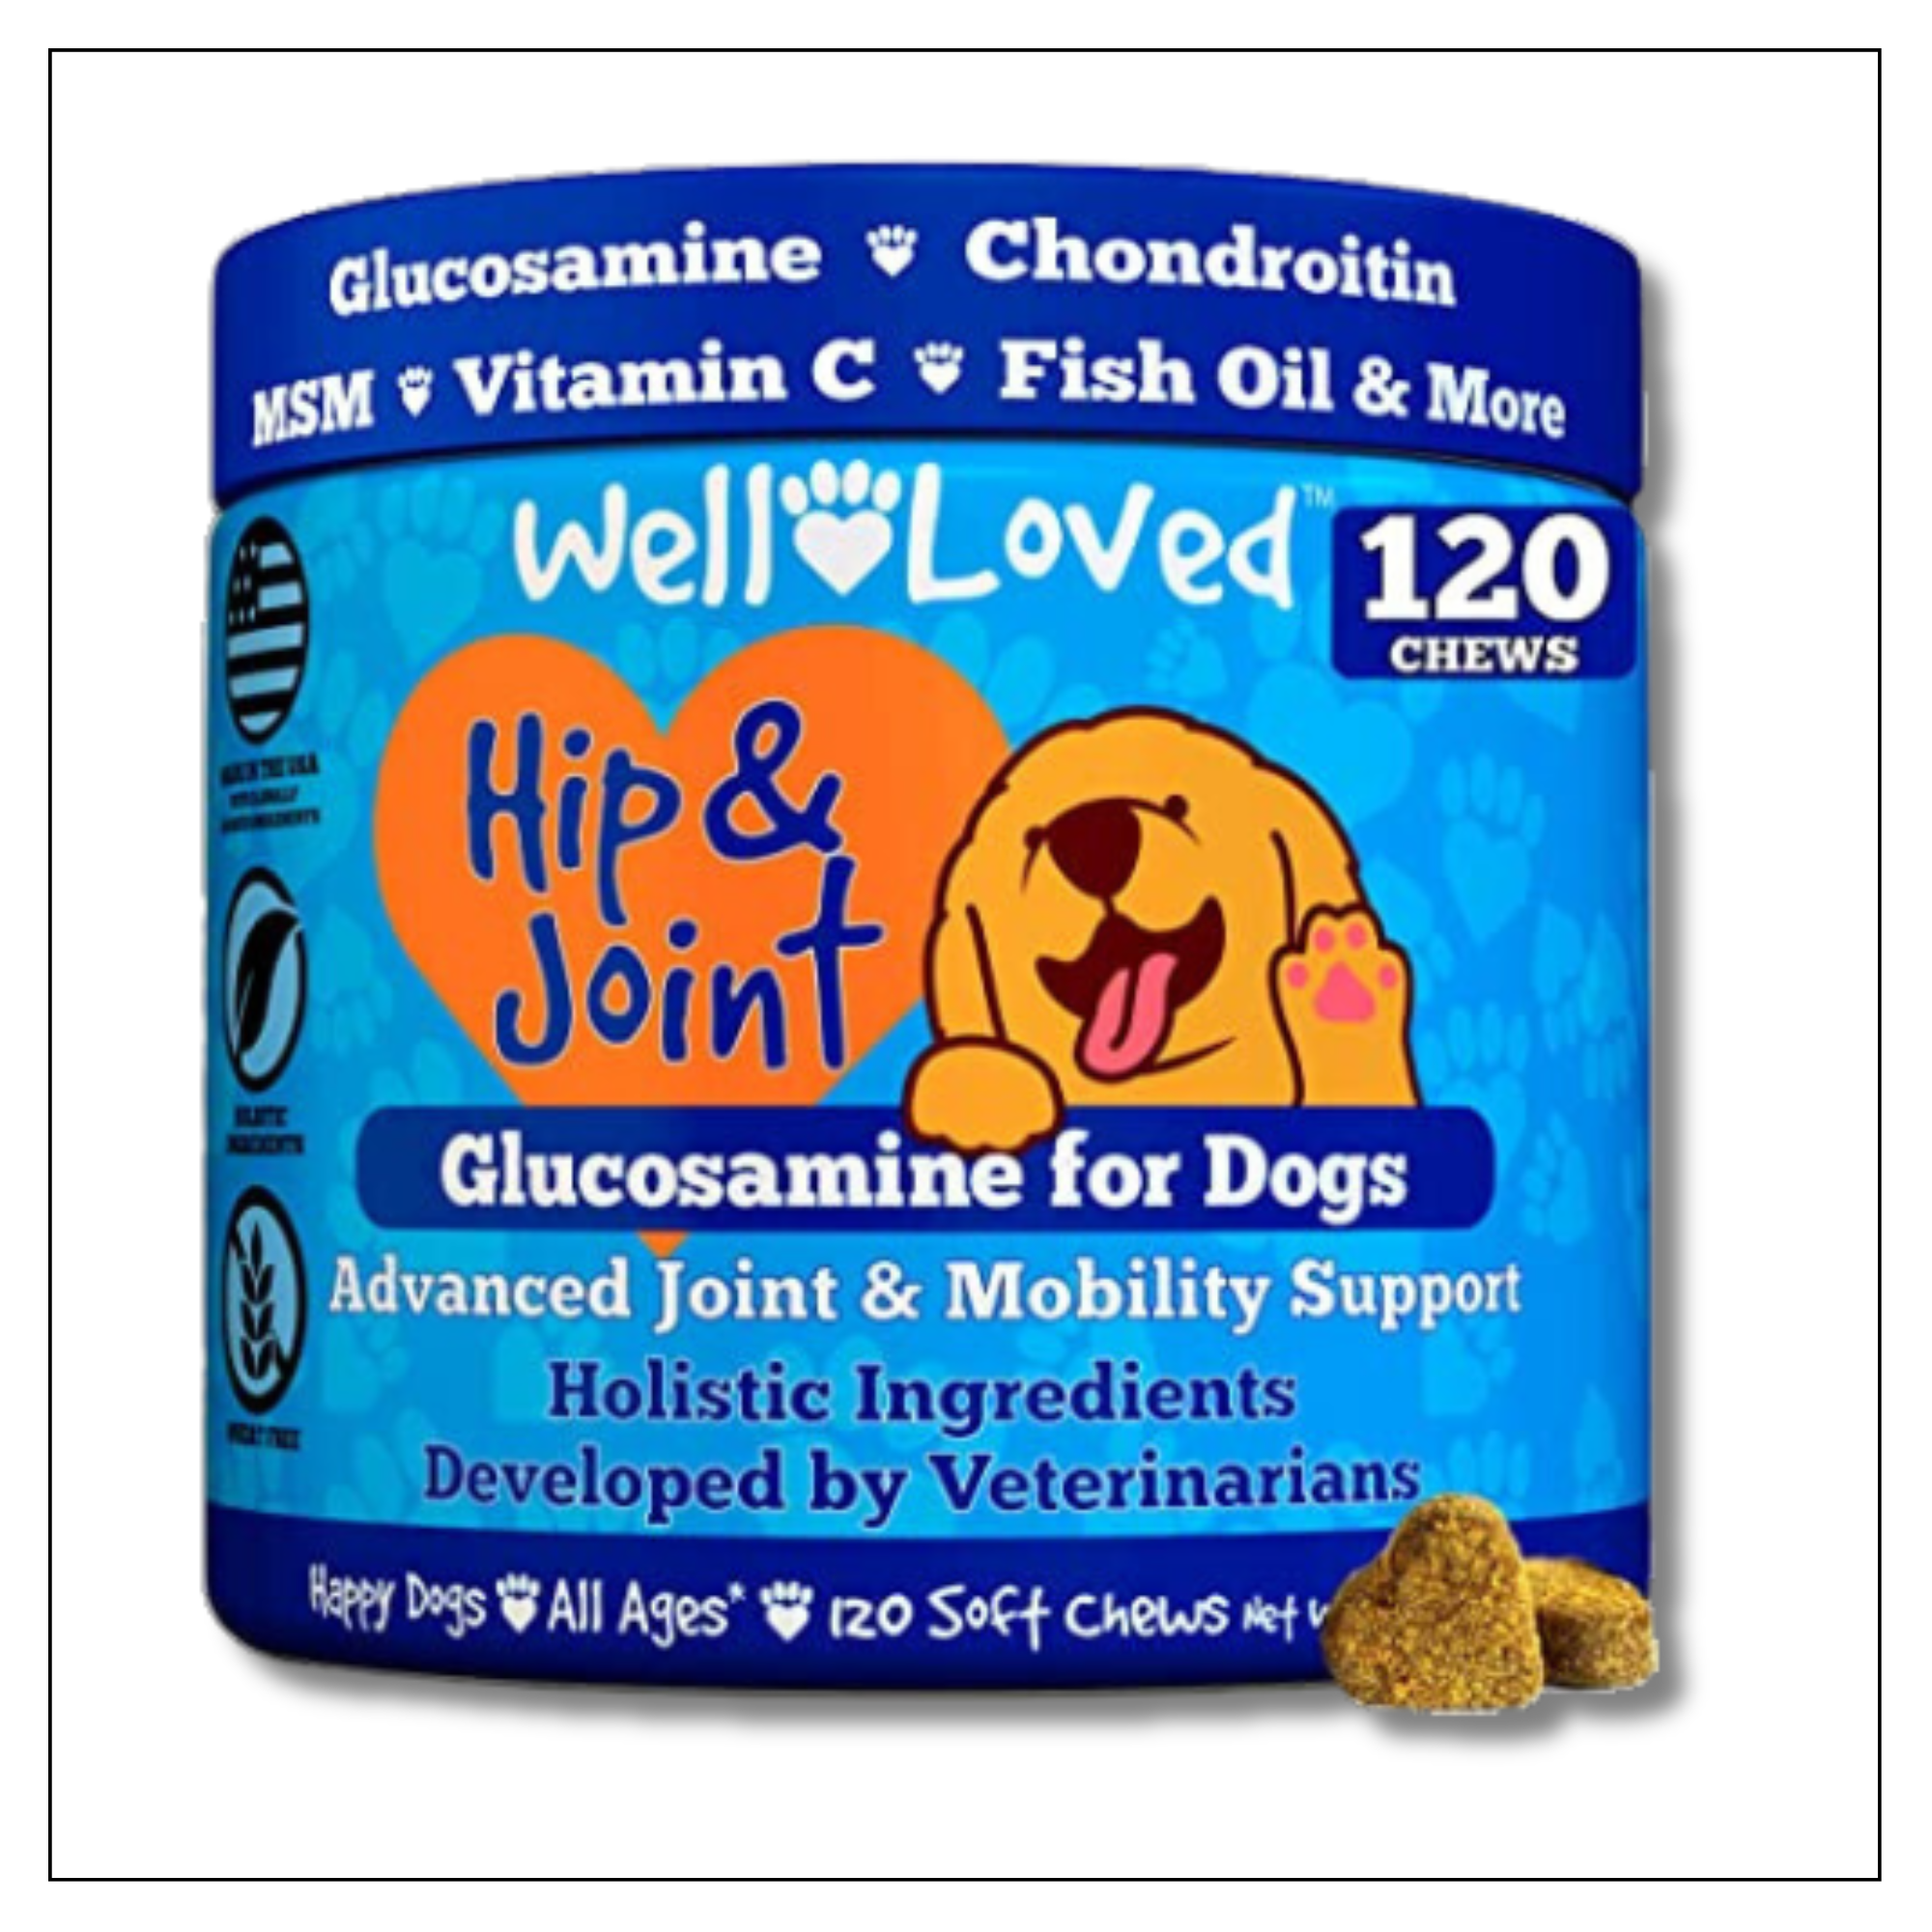 Well Loved Glucosamine for Dogs